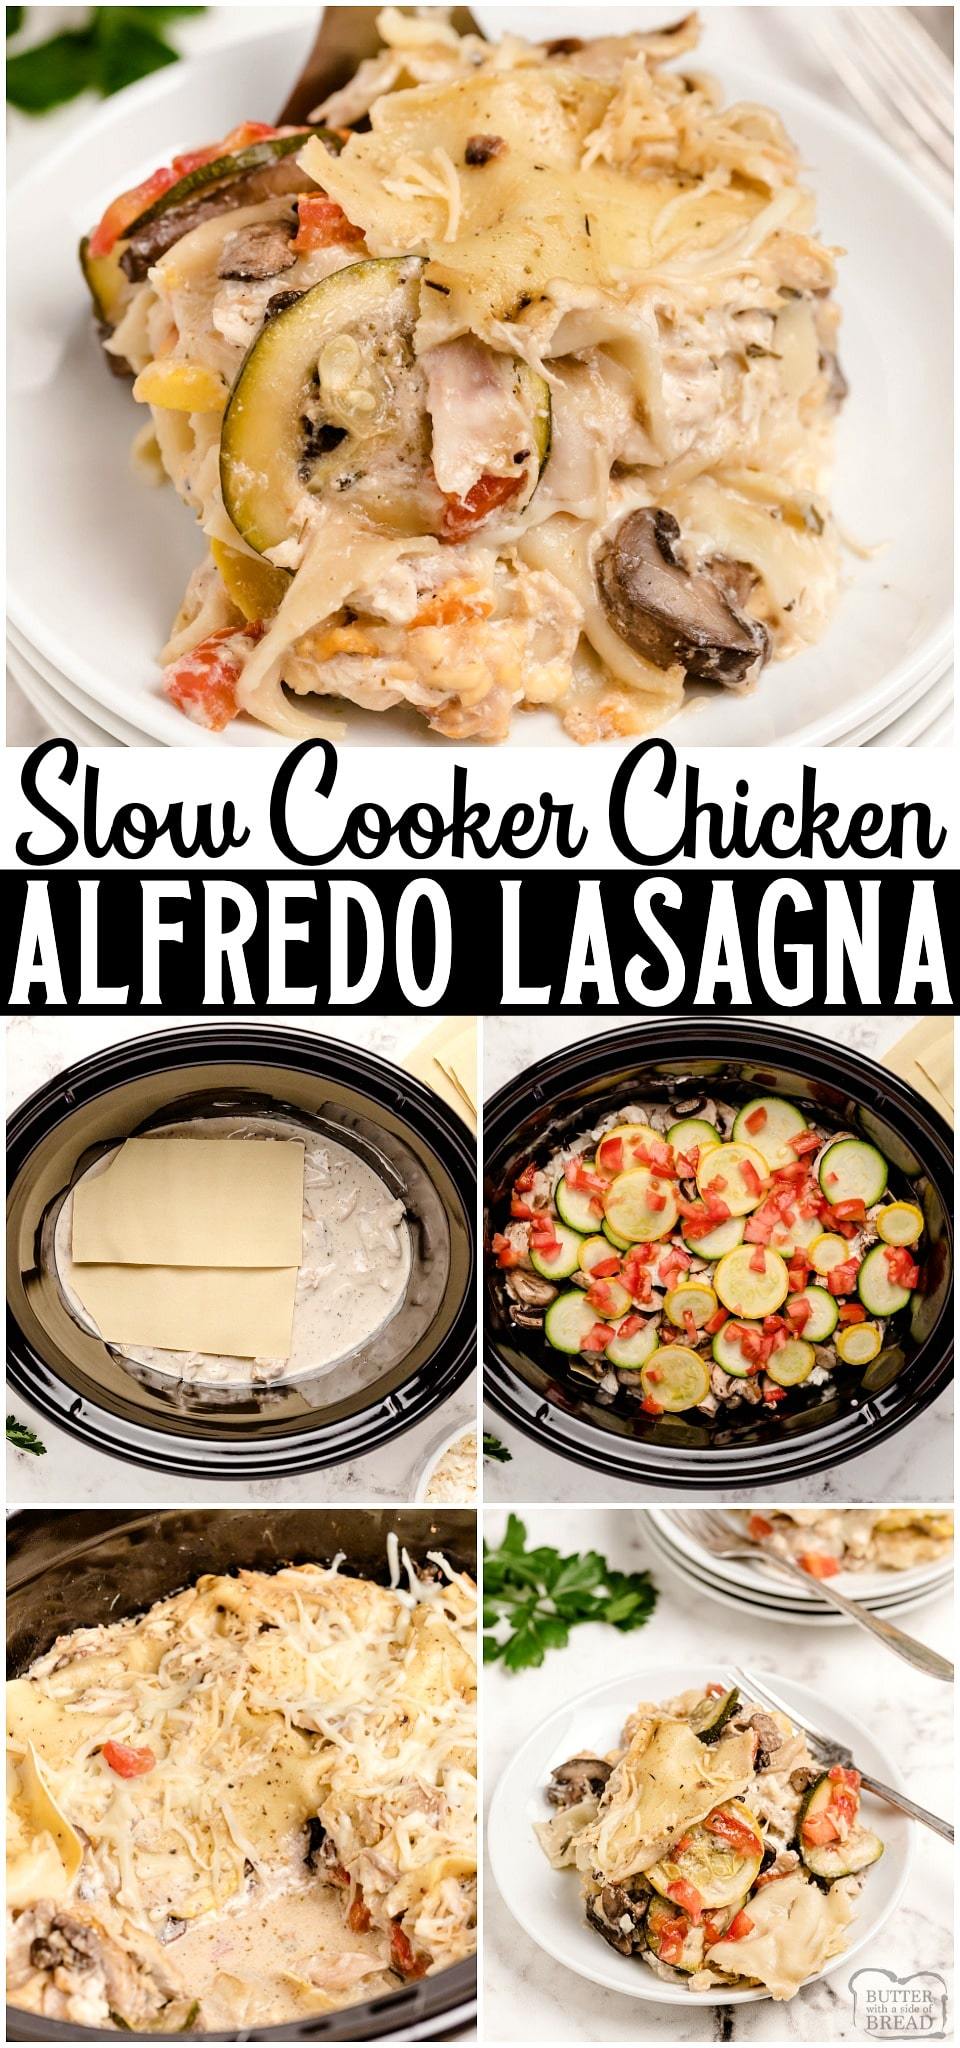 Slow Cooker Chicken Alfredo Lasagna packed with vegetables, tender chicken and 3 kinds of cheese! Easy crockpot lasagna recipe perfect for busy weeknights!  #crockpot #slowcooker #lasagna #chickenalfredo #vegetables #healthydinner #easyrecipe from BUTTER WITH A SIDE OF BREAD